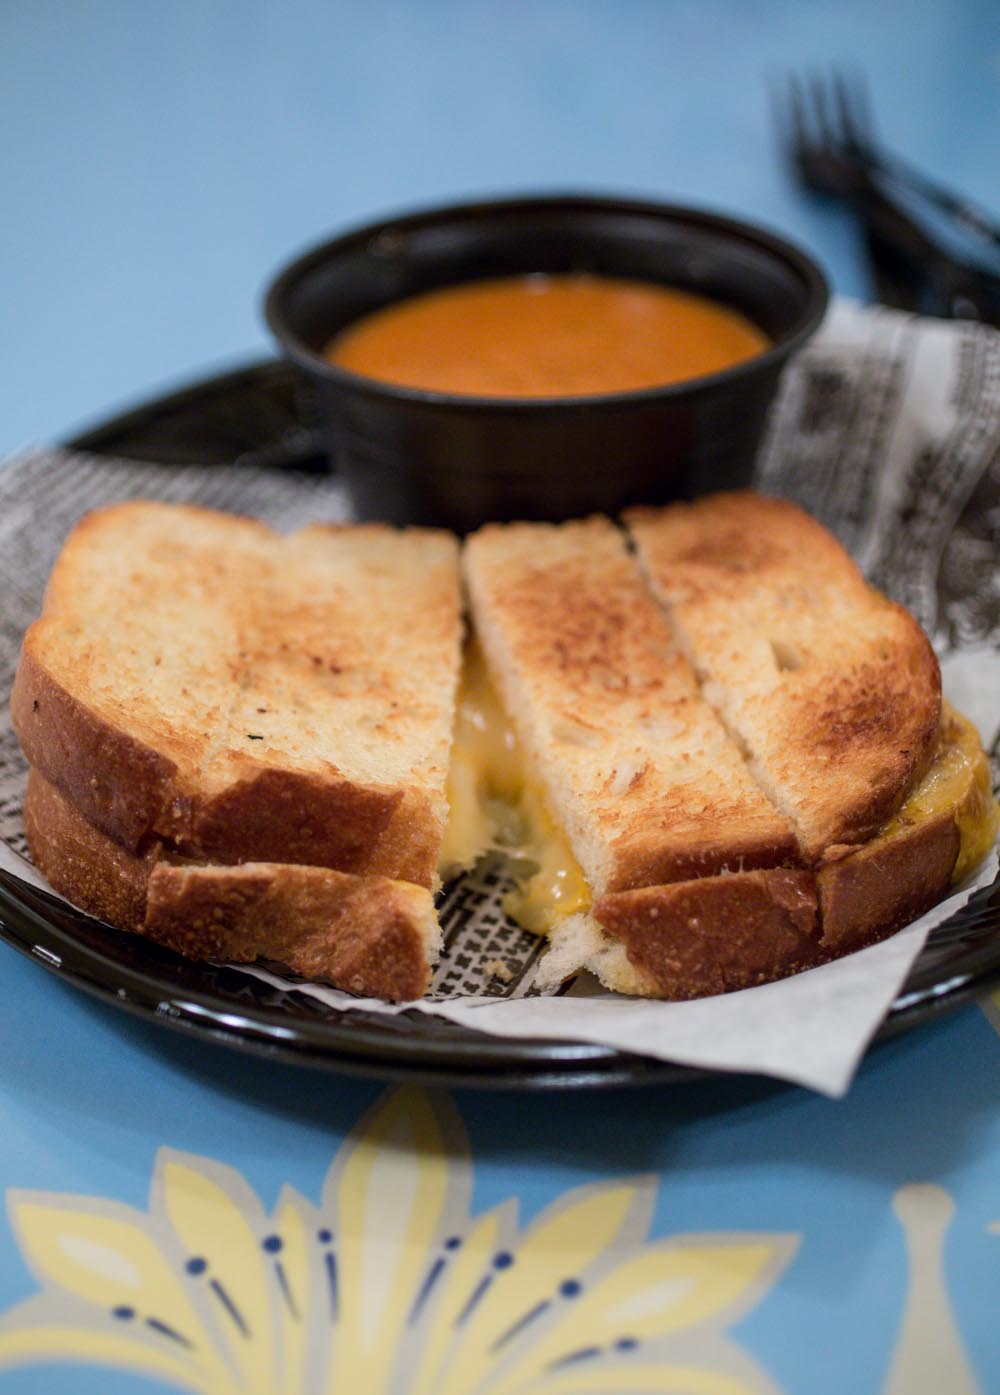 Disneyland Holly Jolly Bakery Cafe Tomato Basil Soup and Grilled Cheese